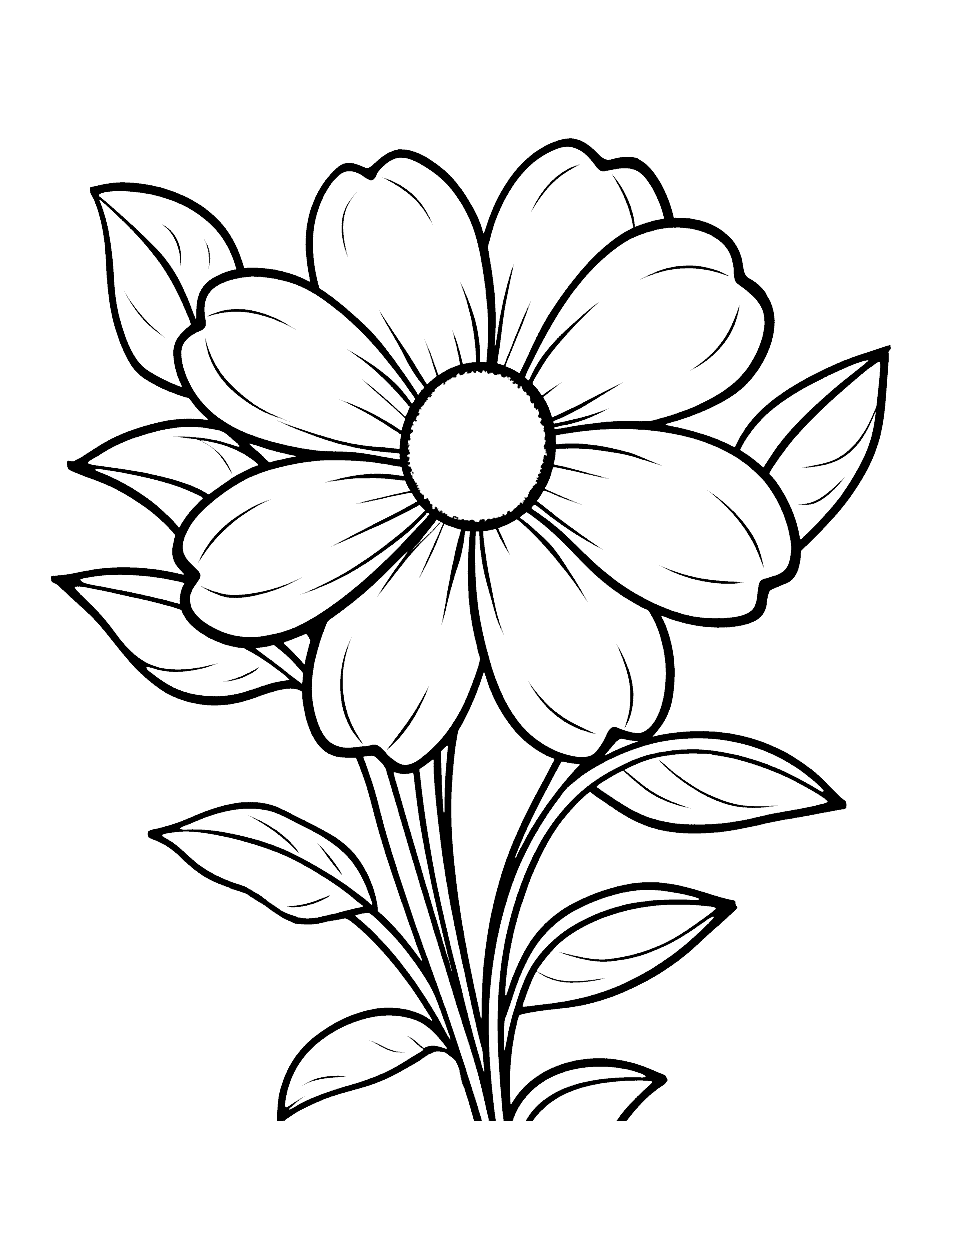 Pretty Preschool Petals Flower Coloring Page - An easy and cute floral design suitable for preschool children.